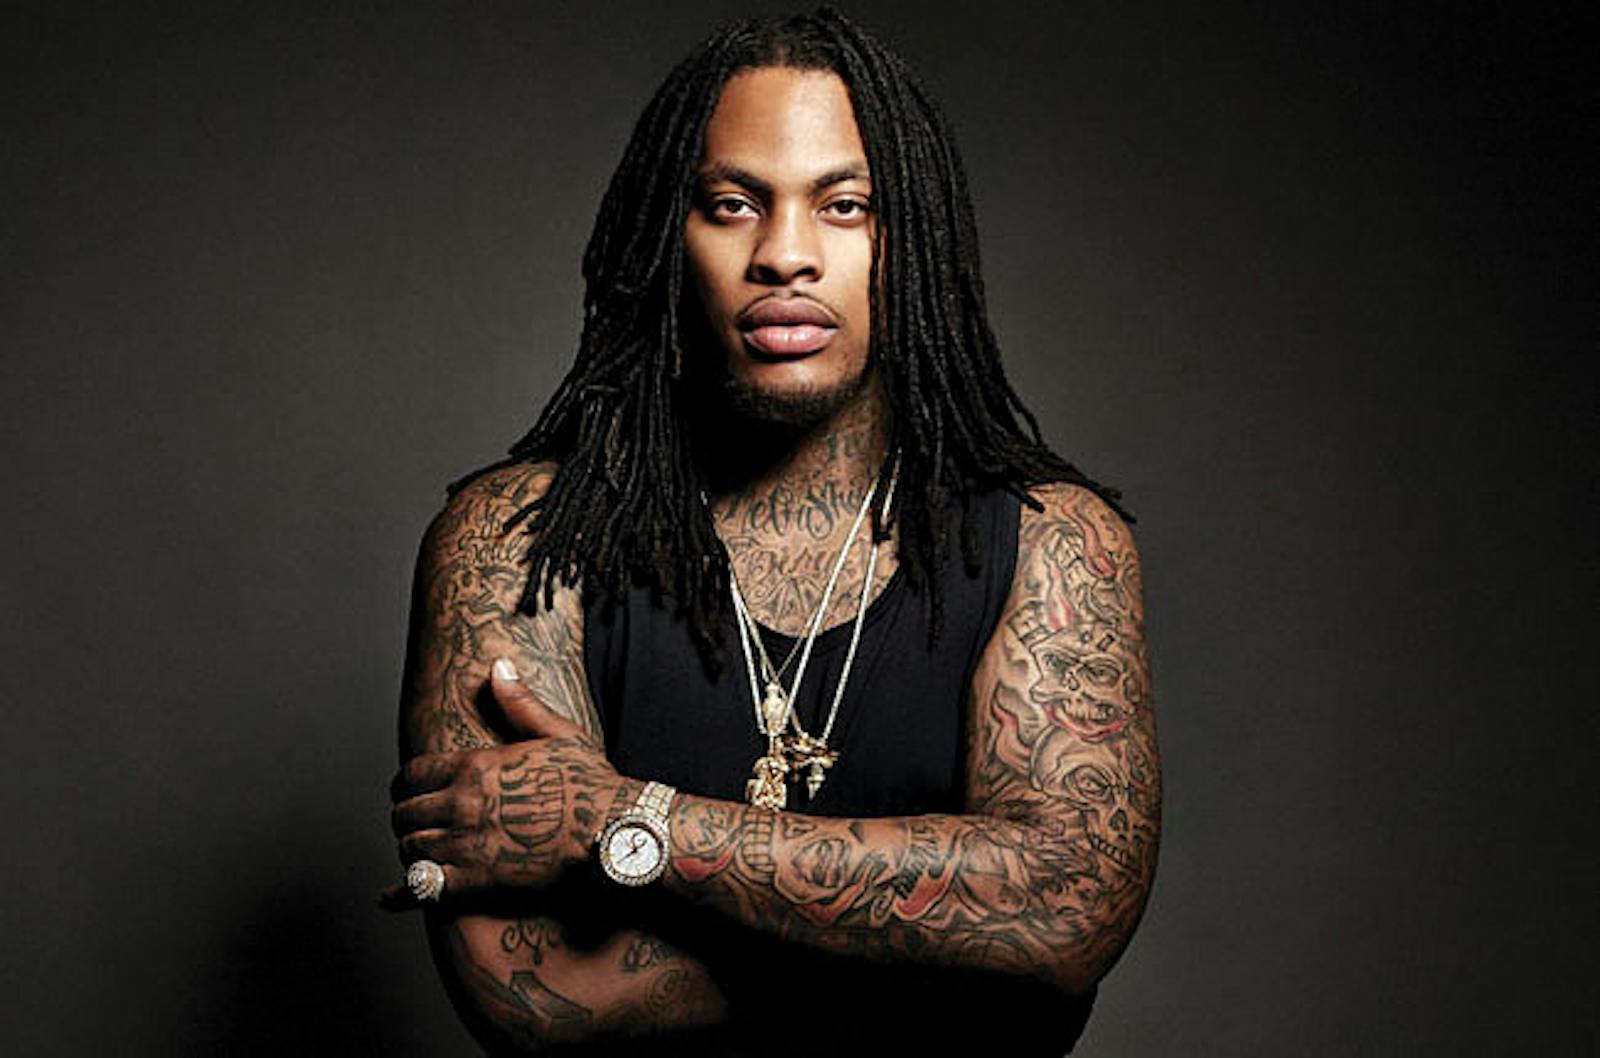 Waka Flocka Flame to play Spring Weekend The Brown Daily Herald